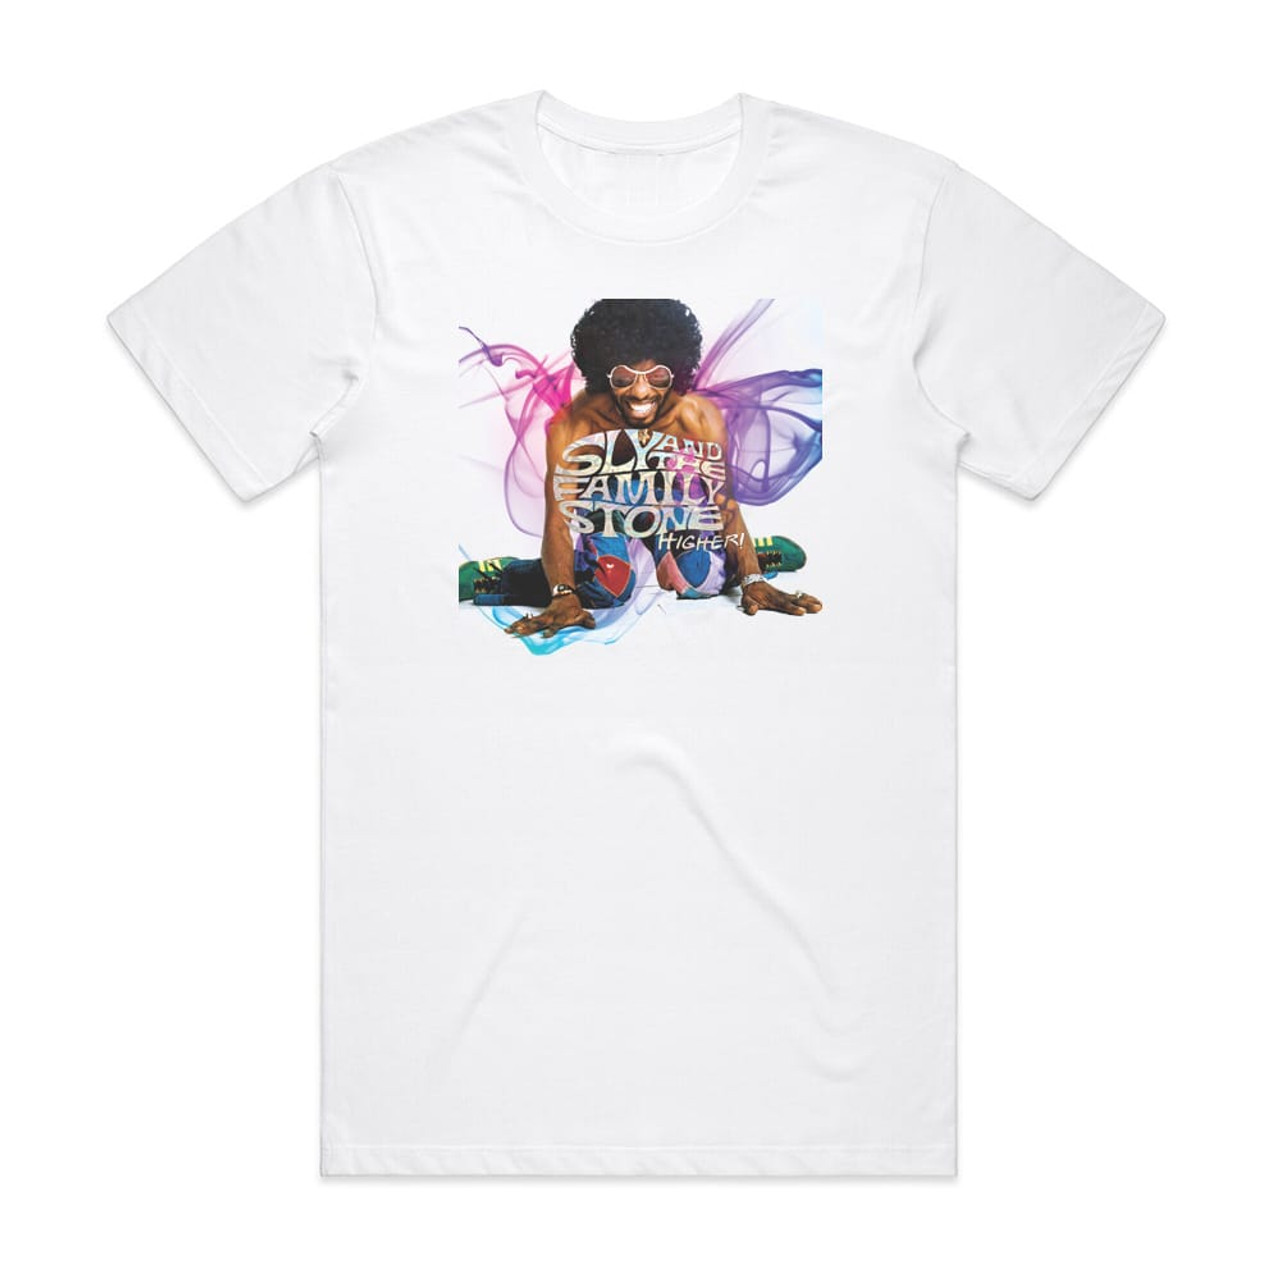 Sly and The Family Stone Album Cover T-Shirt